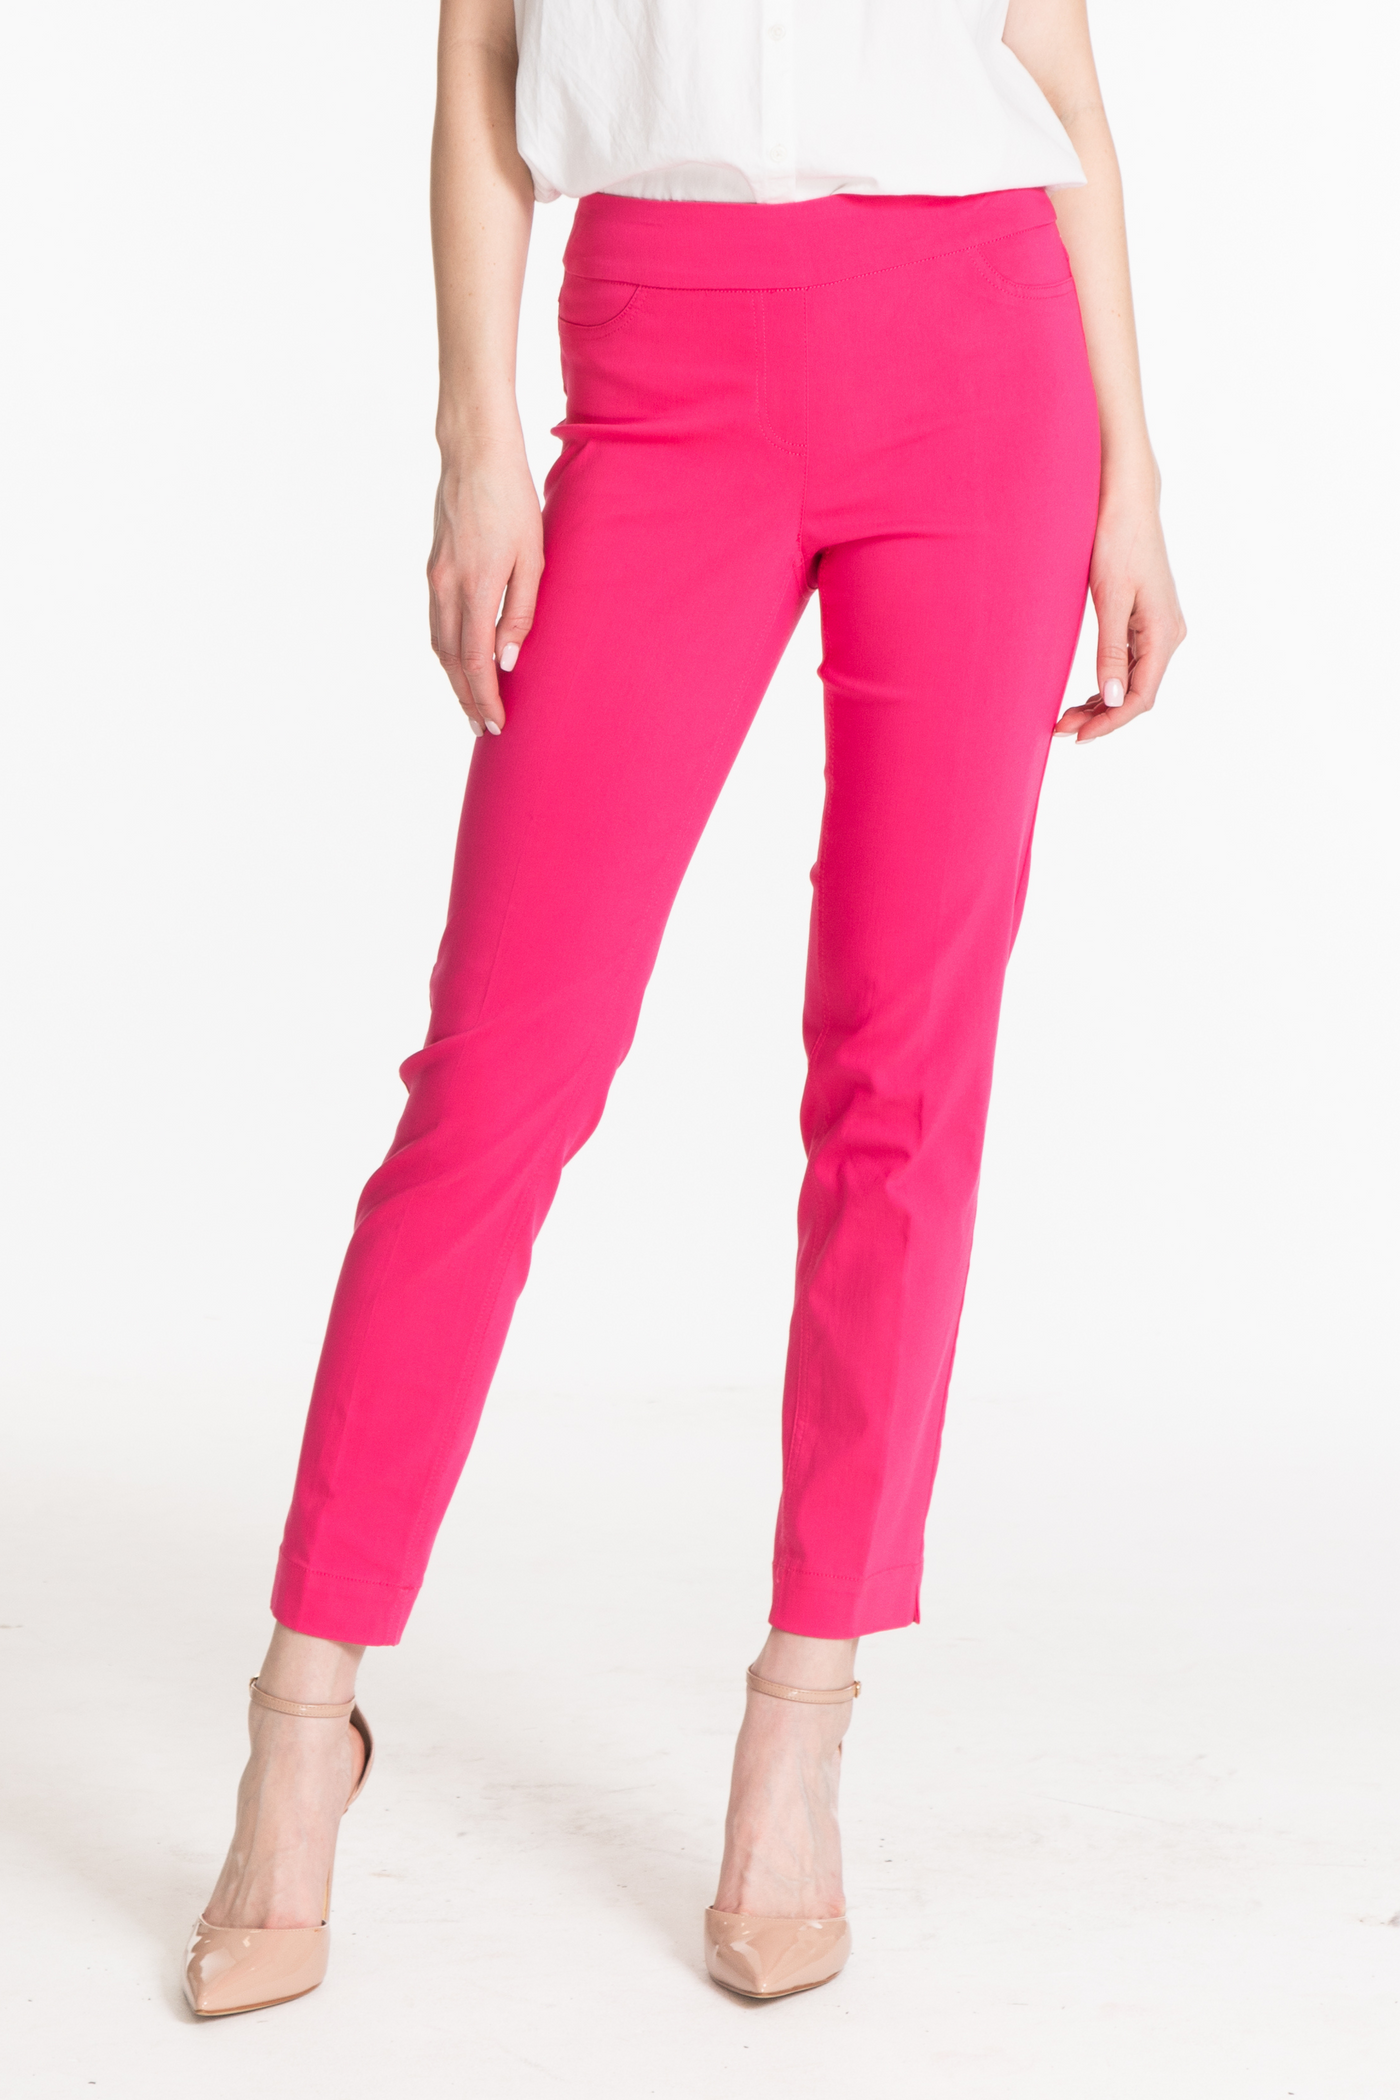 M2623P Slimsations - Pull-on Ankle Pant w/Back Pockets (Avai